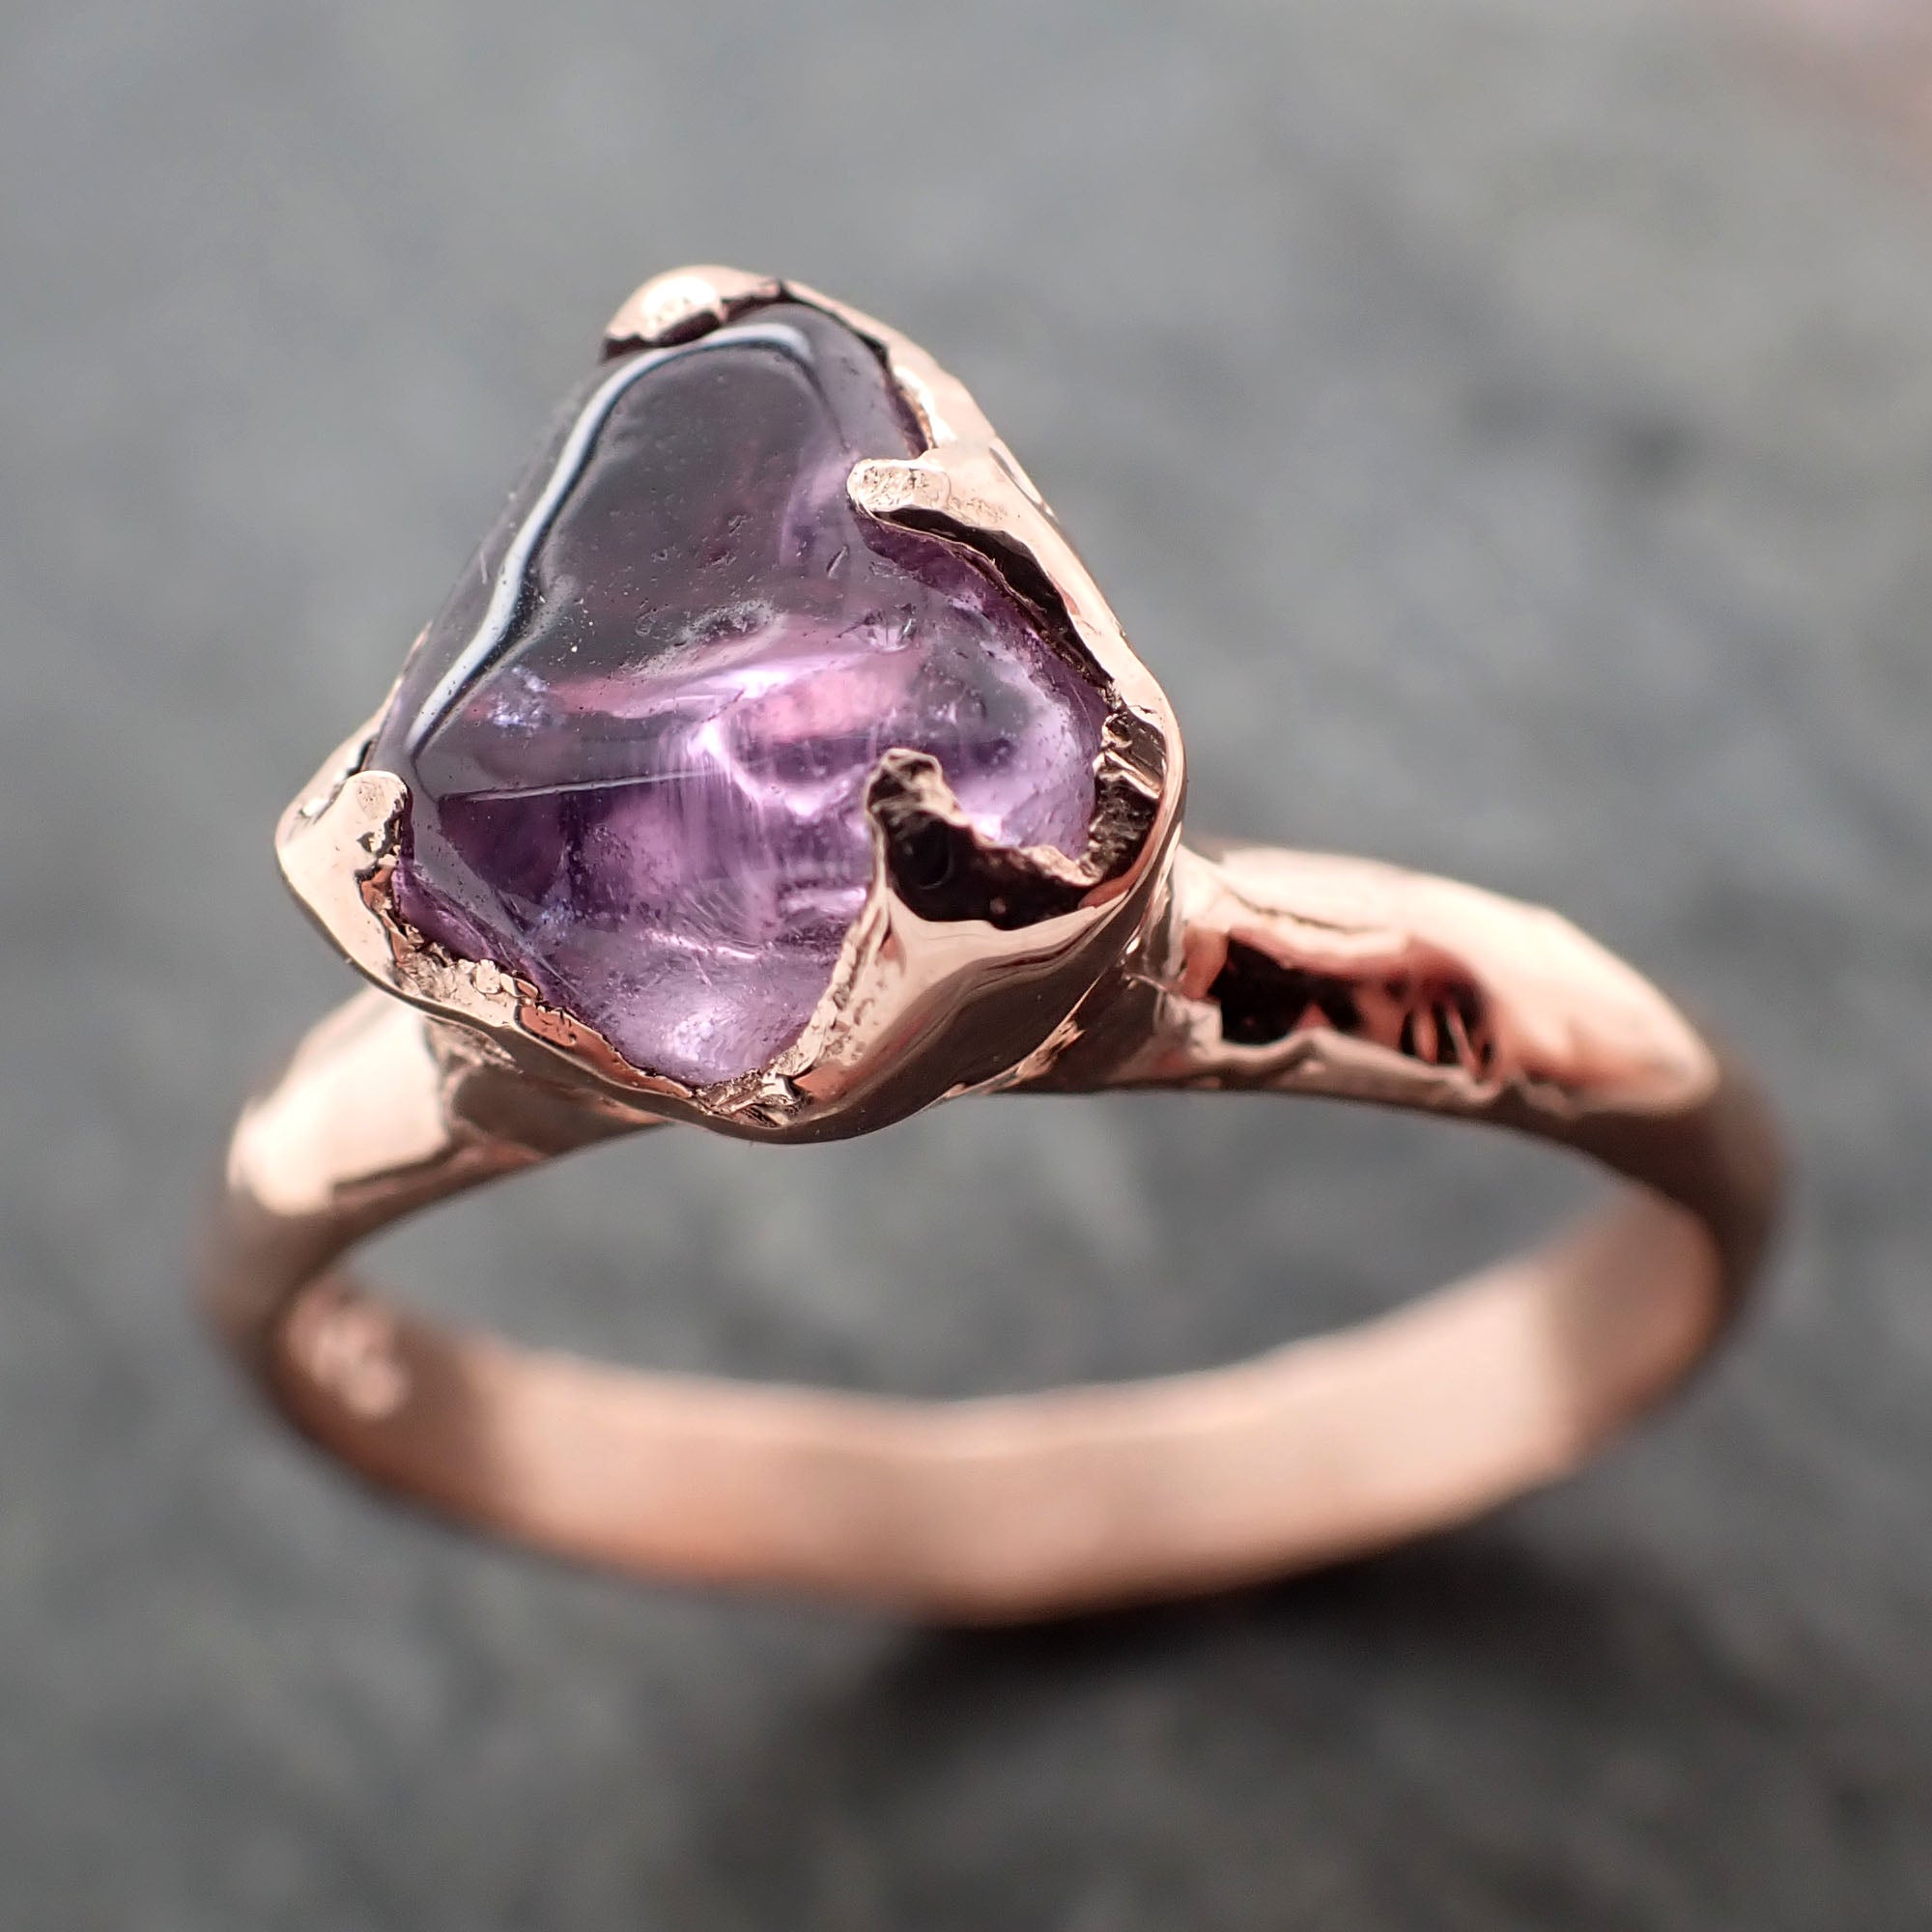 Sapphire tumbled pink polished 14k Rose gold Solitaire gemstone ring 2874